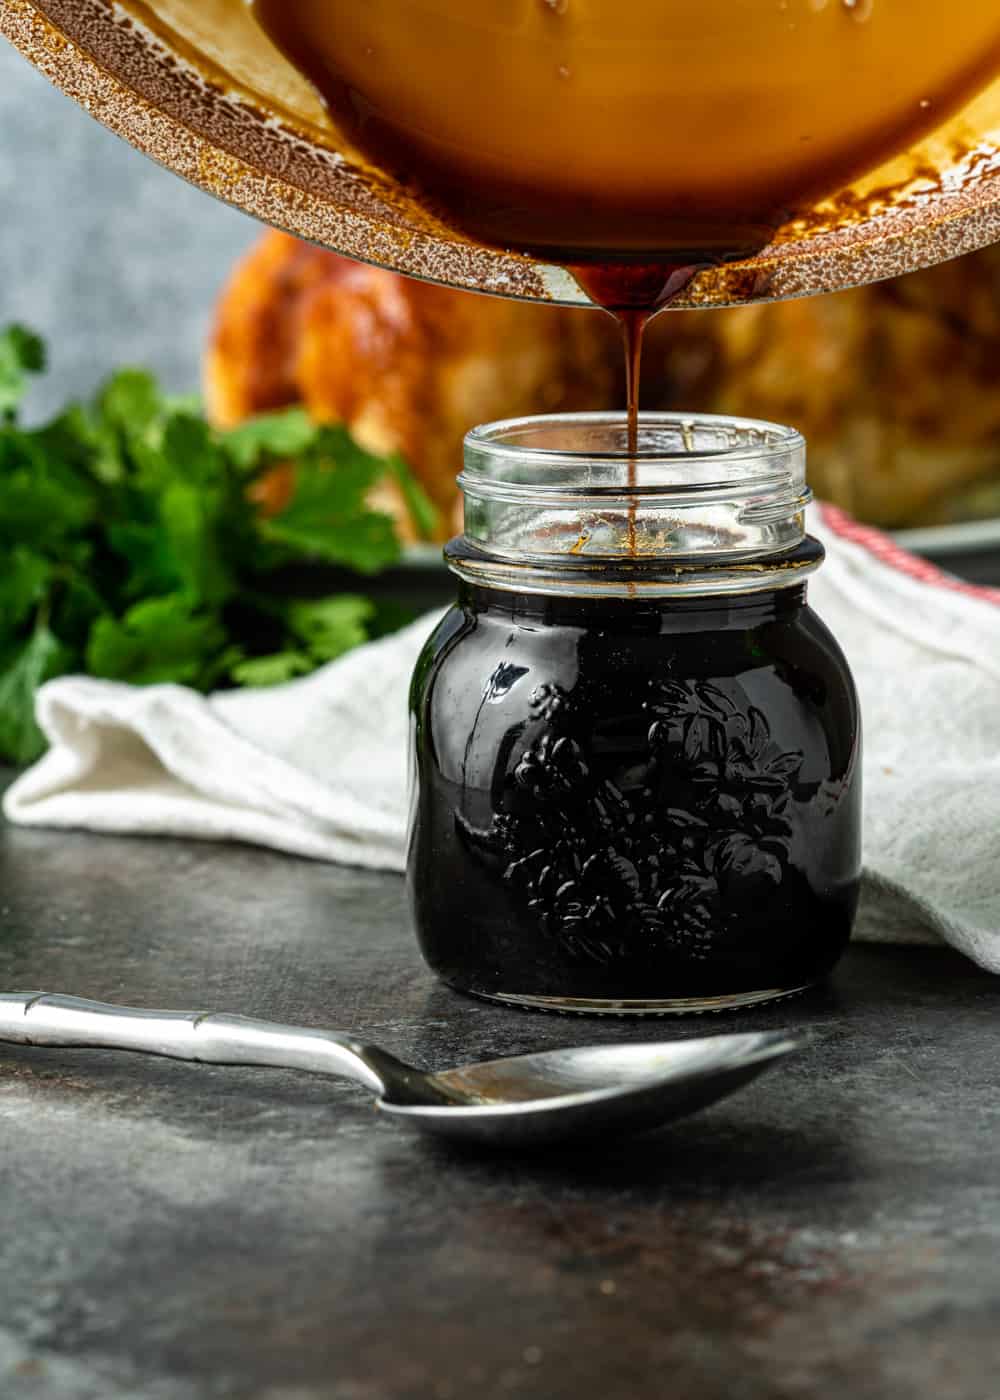 side view: pouring my teriyaki sauce recipe into a glass jar with a spoon in front of the jar